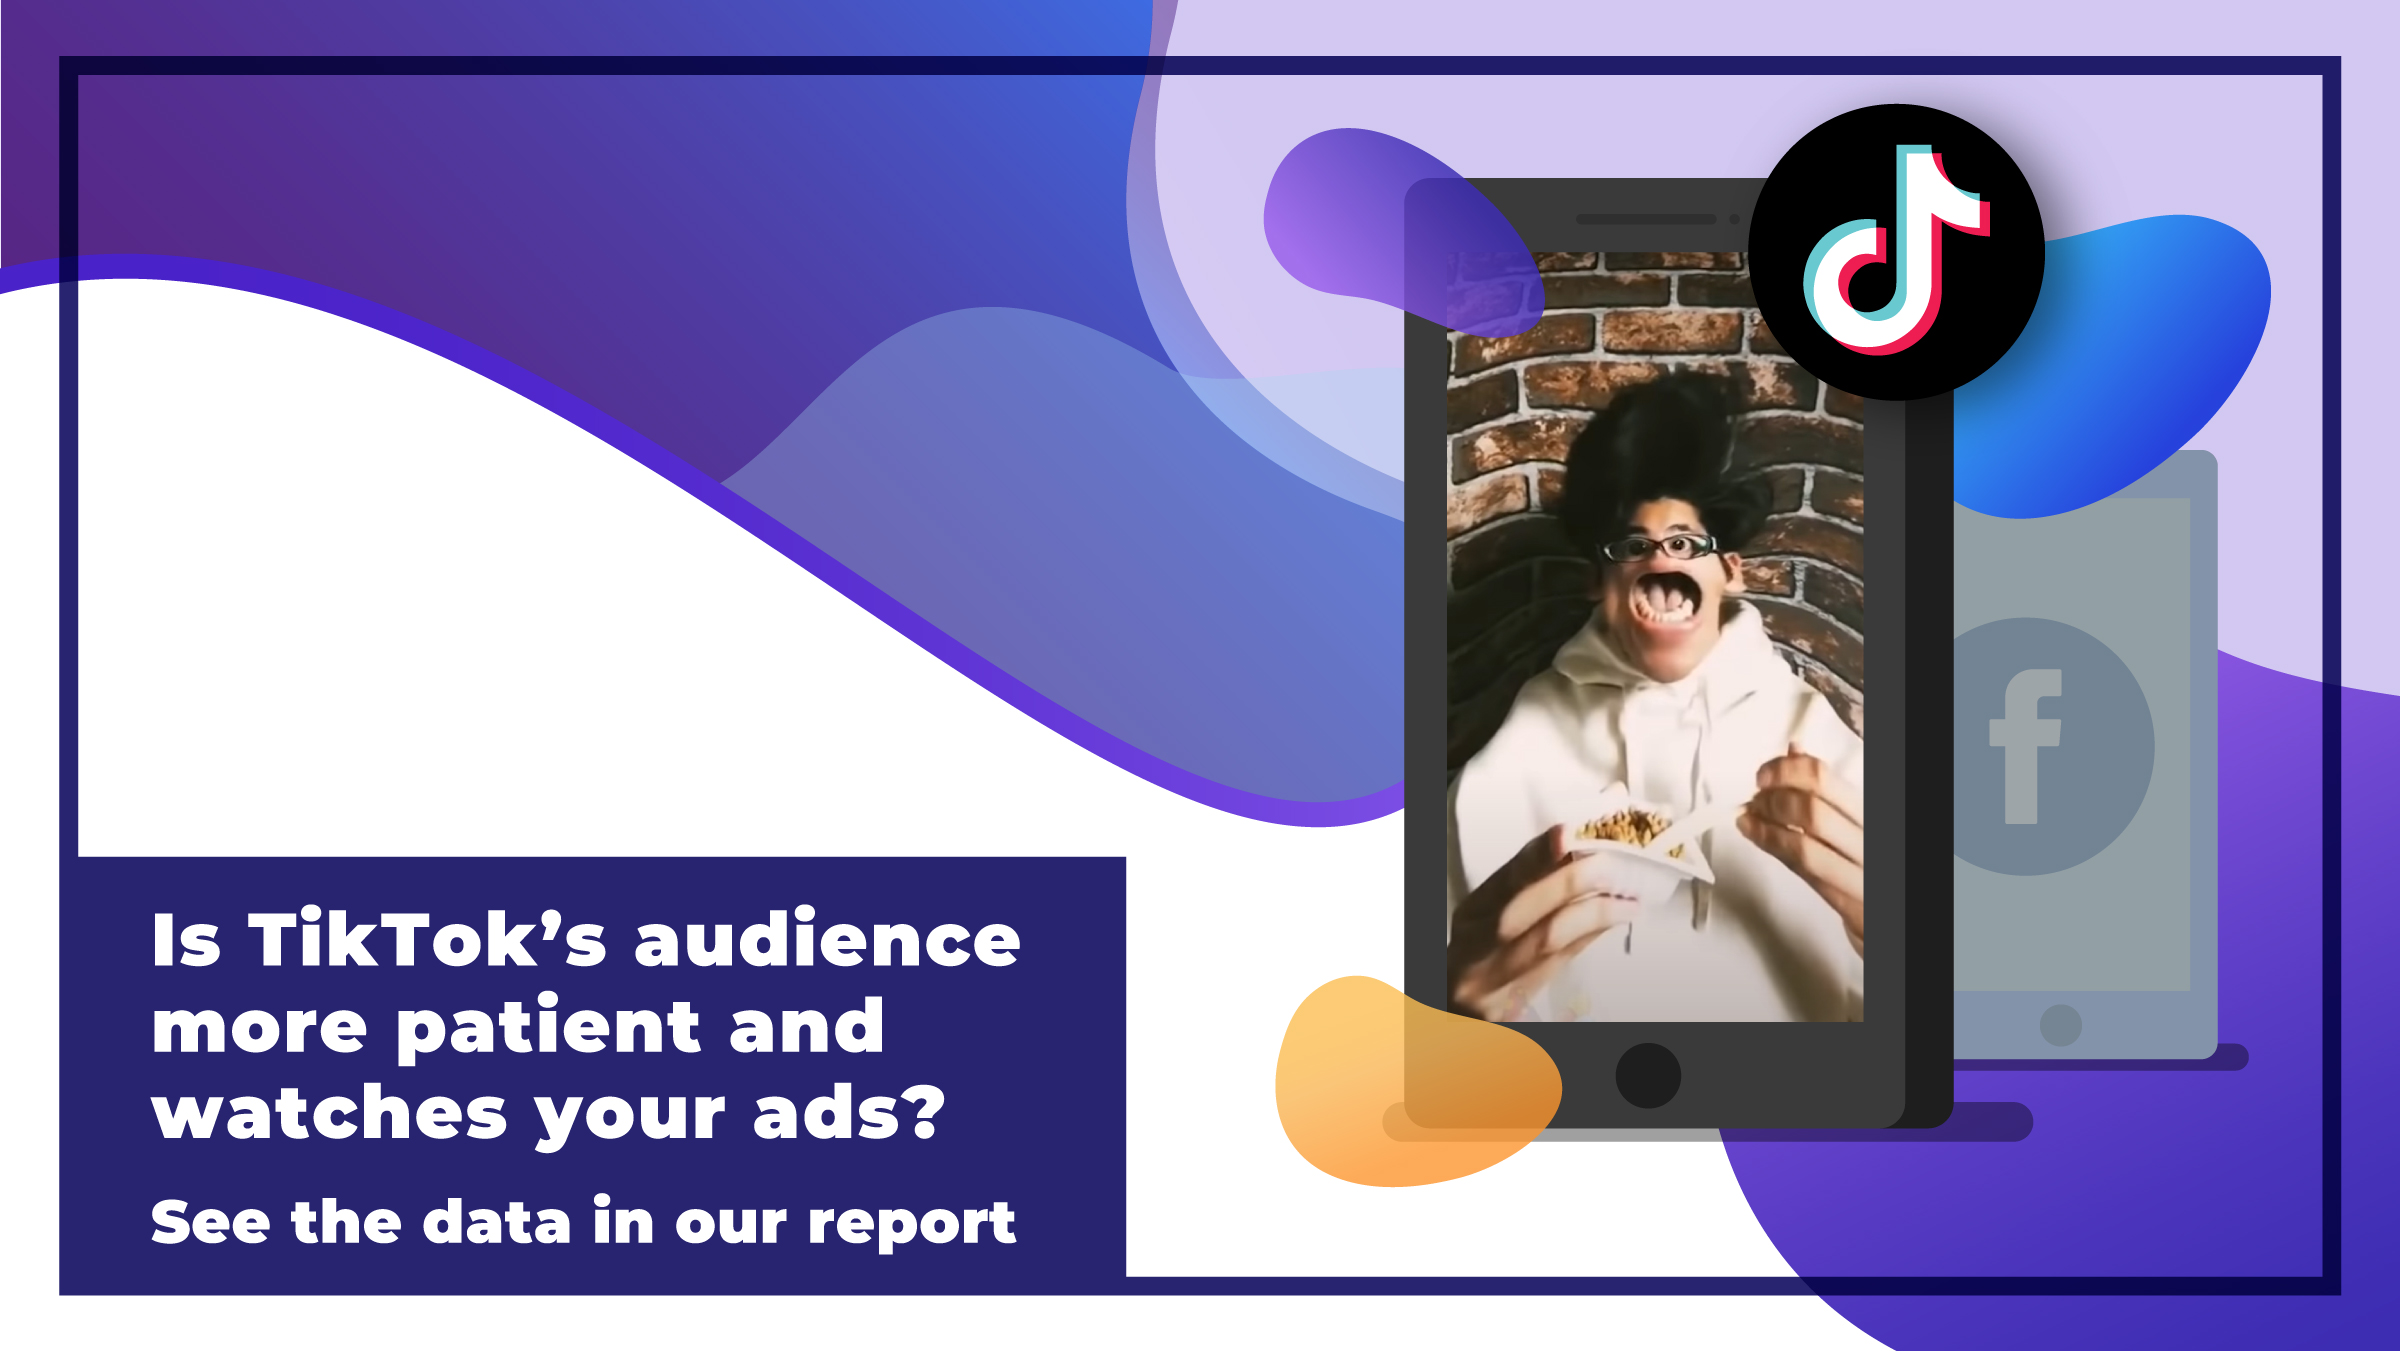 Video engagement report